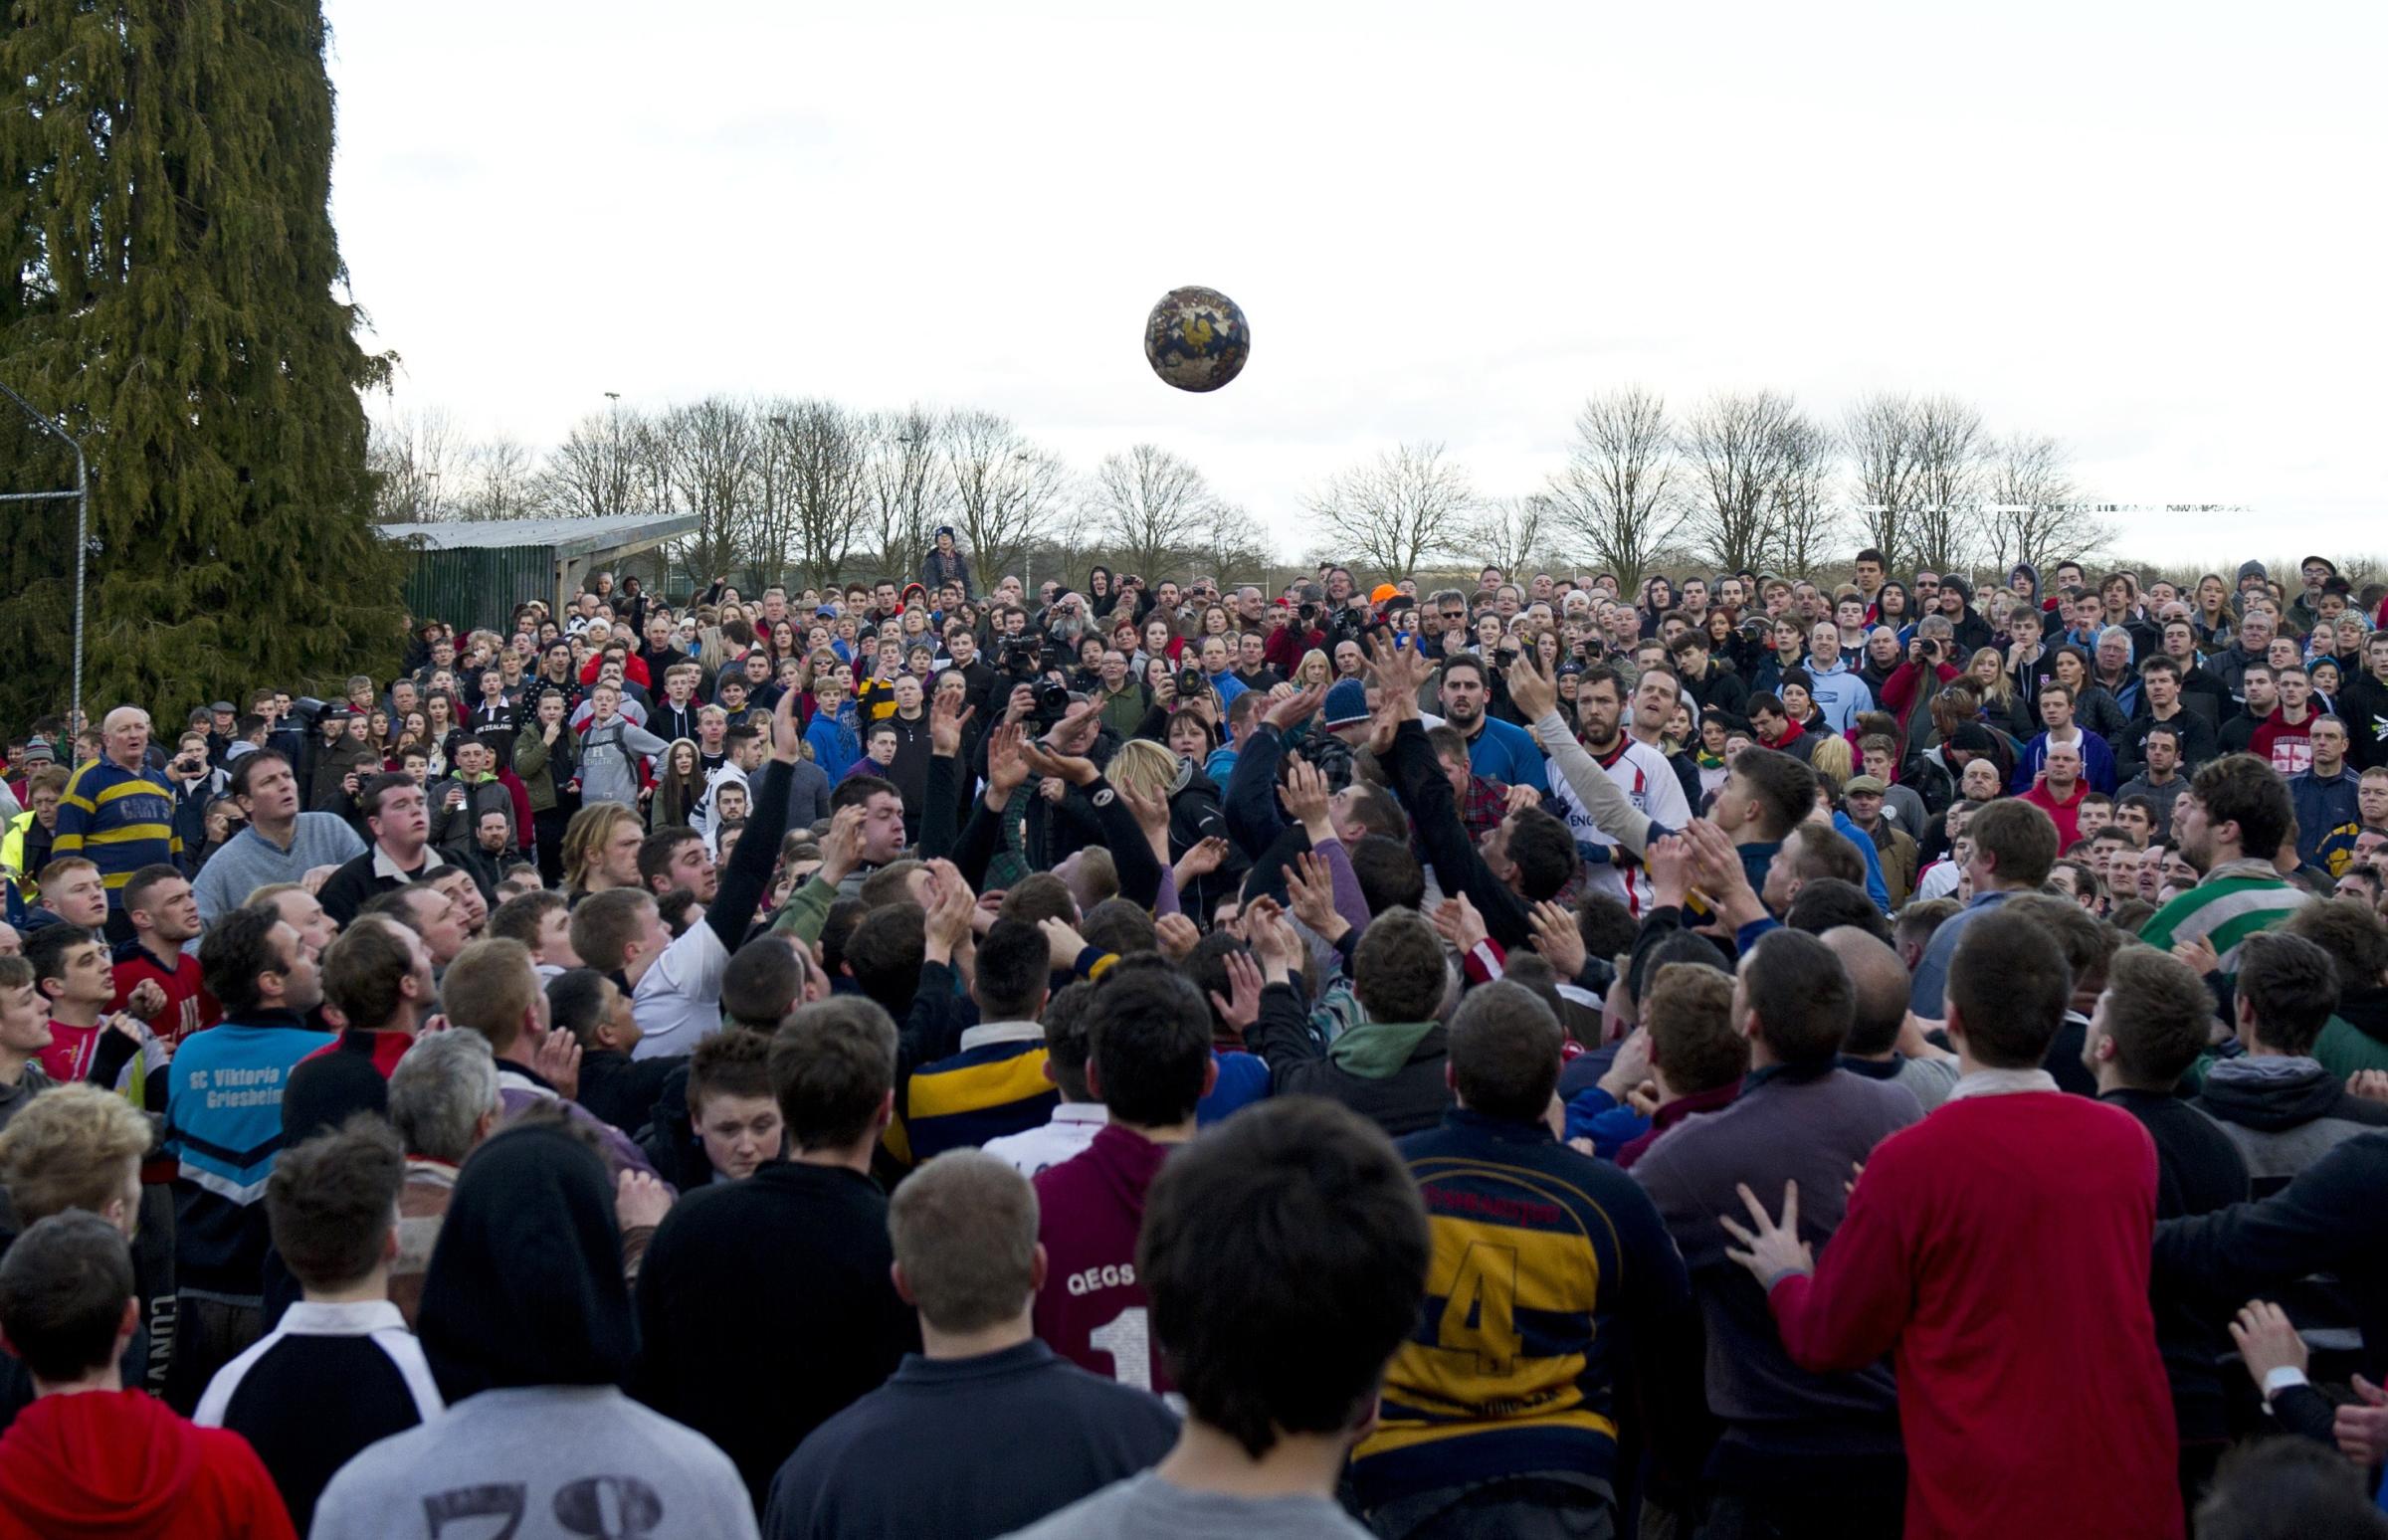 Opposing teams of the Up'ards and the Down'ards compete at the start of the annual Royal Shrovetide Football Match in Ashbourne, Derbyshire, England on February 17, 2015.